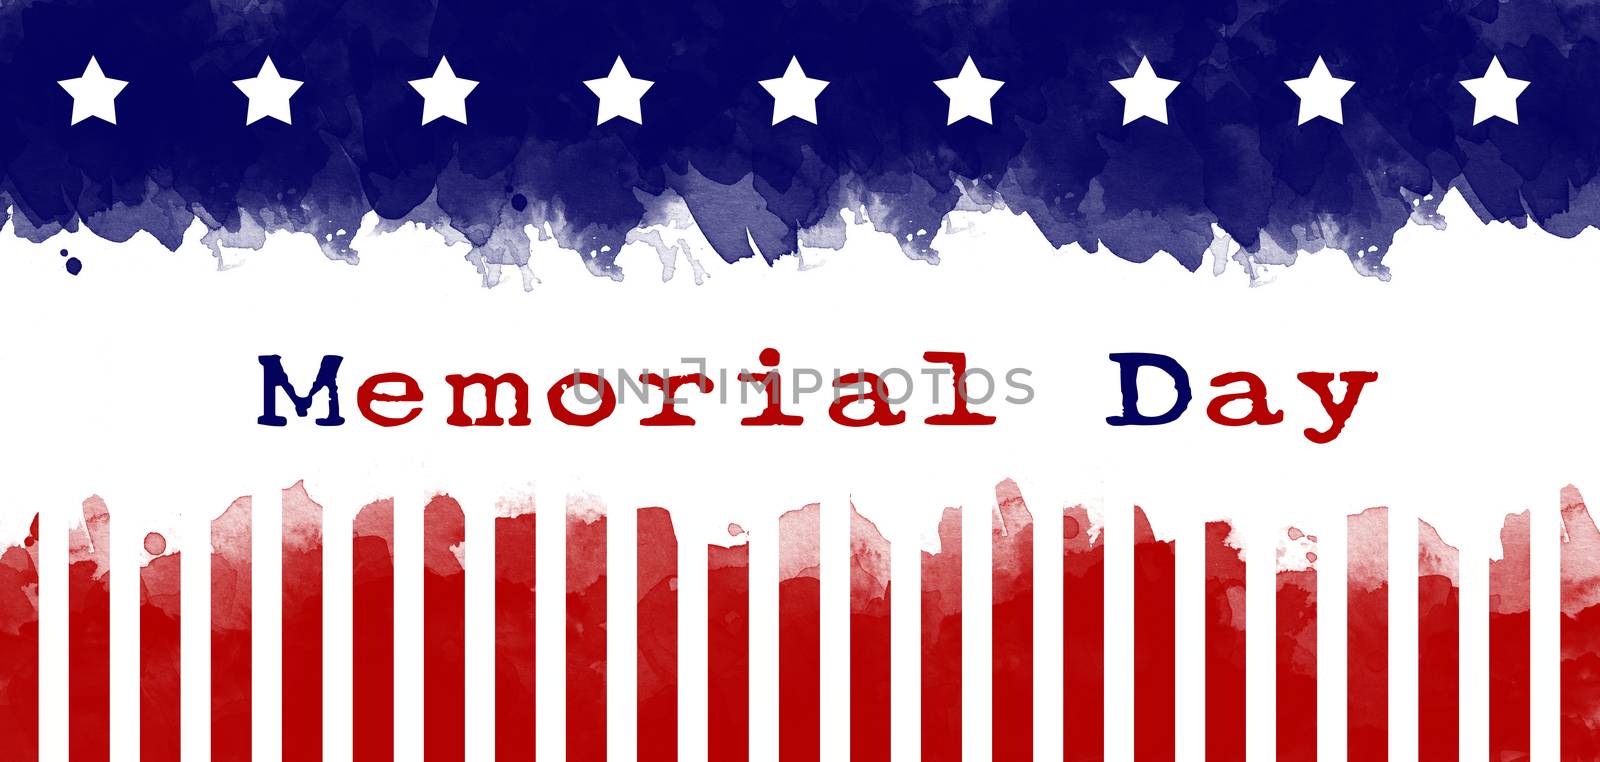 memorial day greeting card american flag grunge background by asiandelight